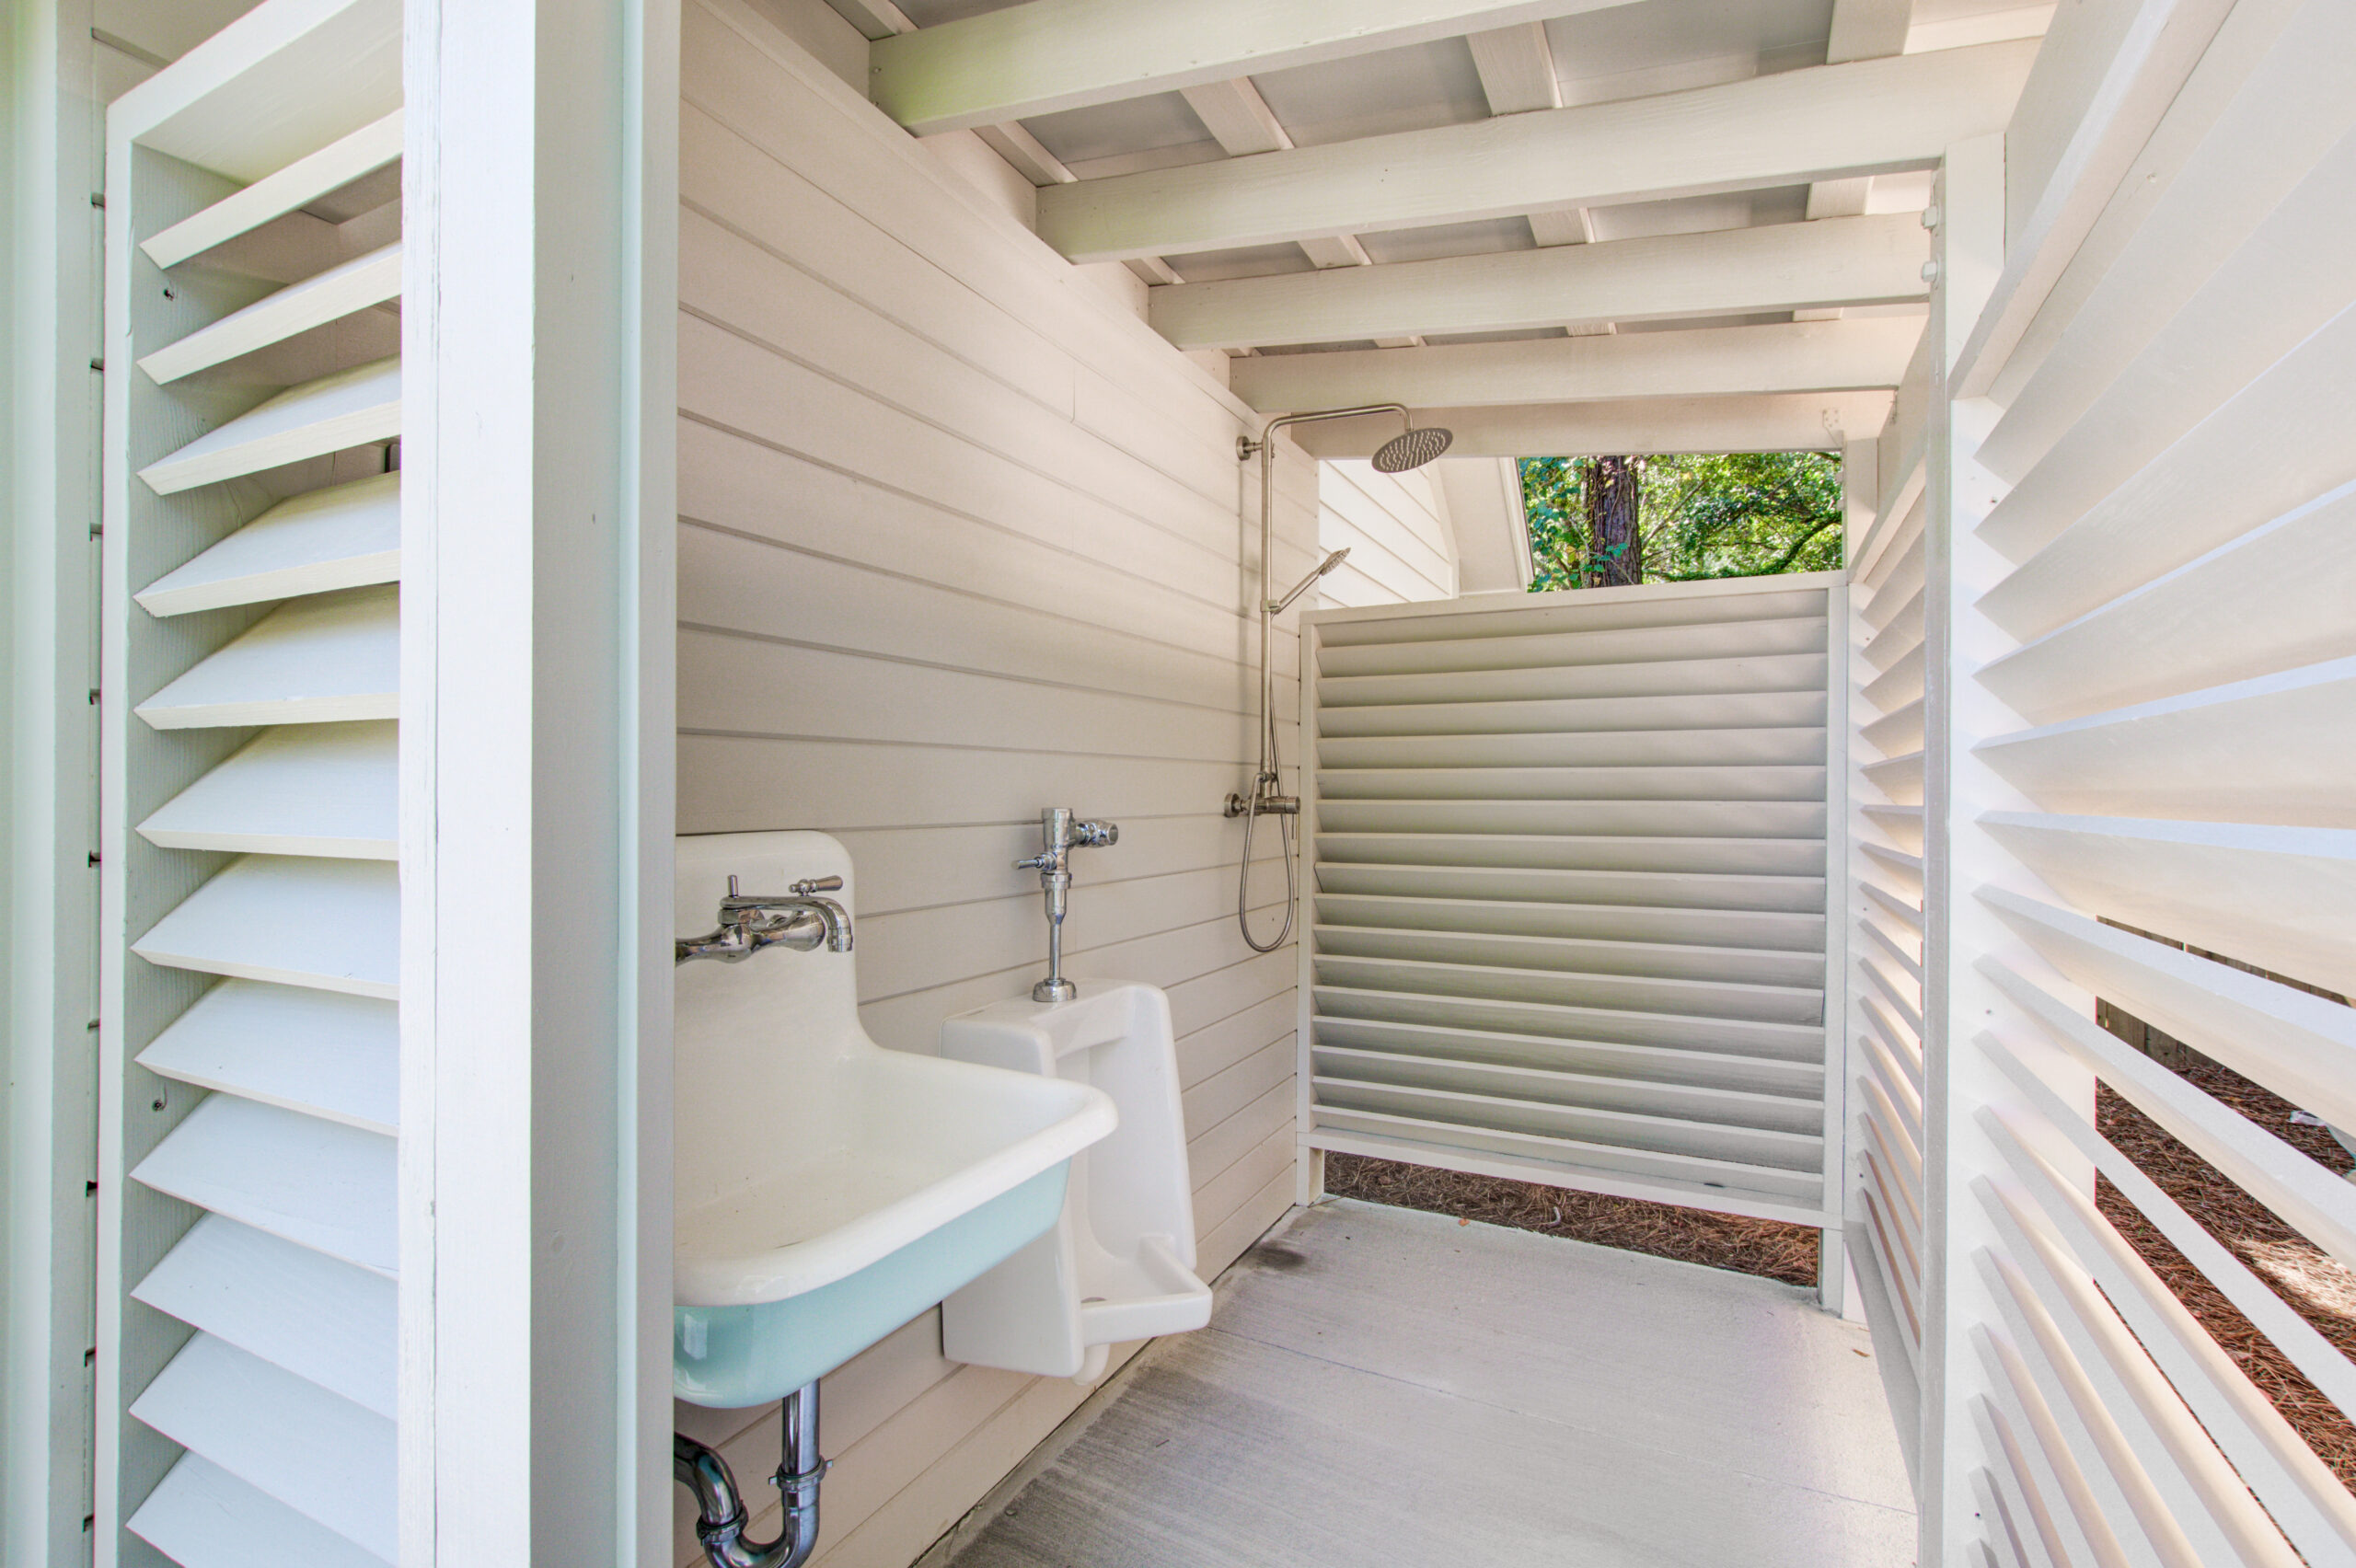 Shutter Walls Enclose The Outdoor Shower with Sink and bathroom -- CK Contracting -- Custom Home Renovations -- Mount Pleasant, SC.